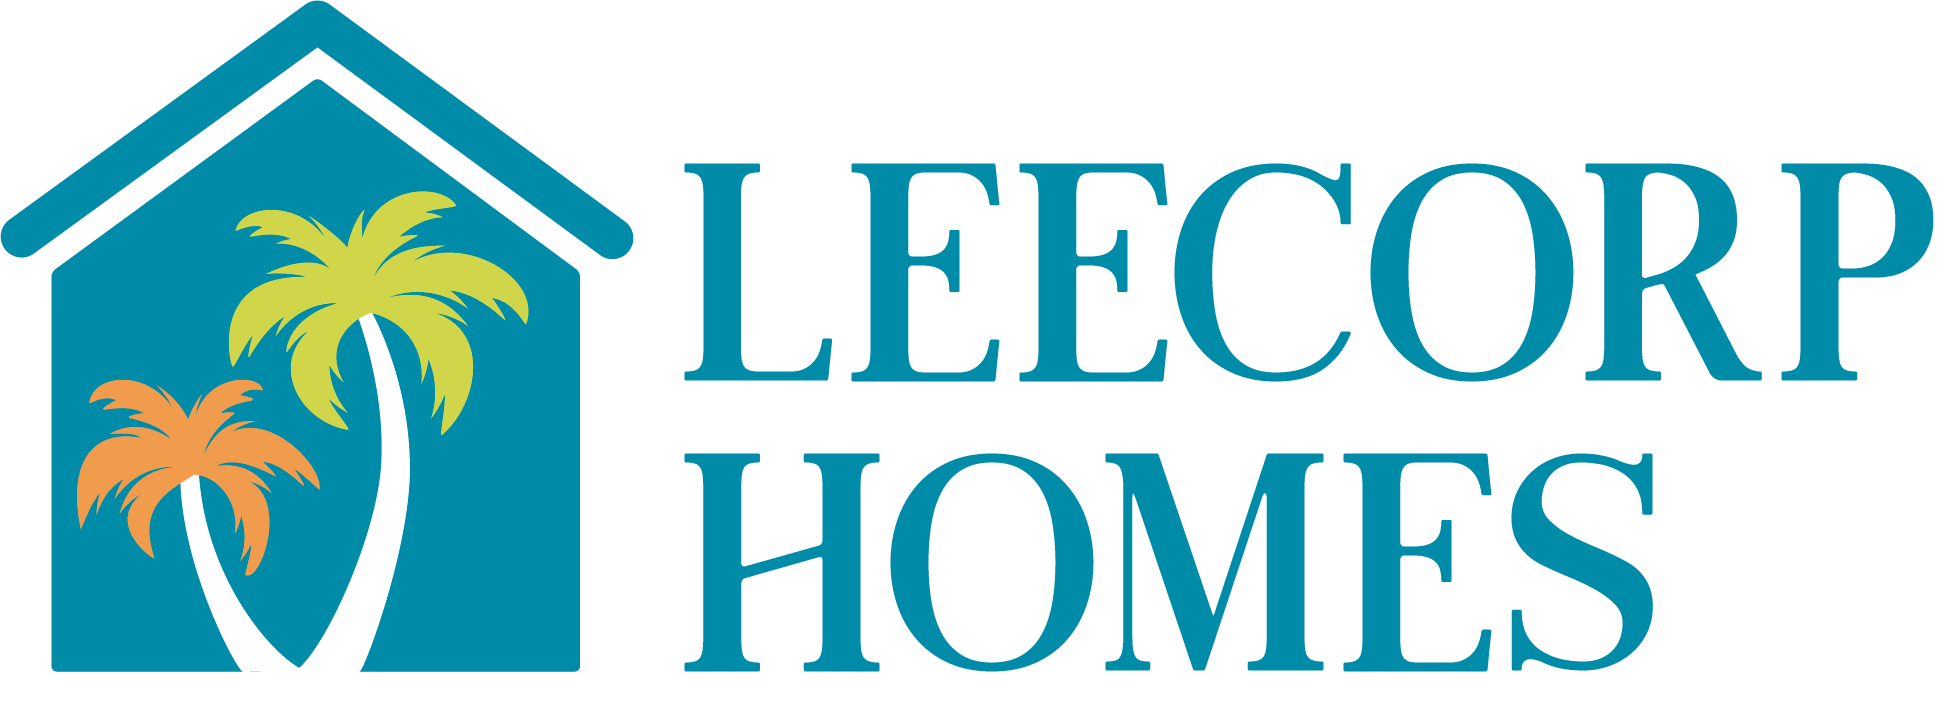 Lee Corp Homes